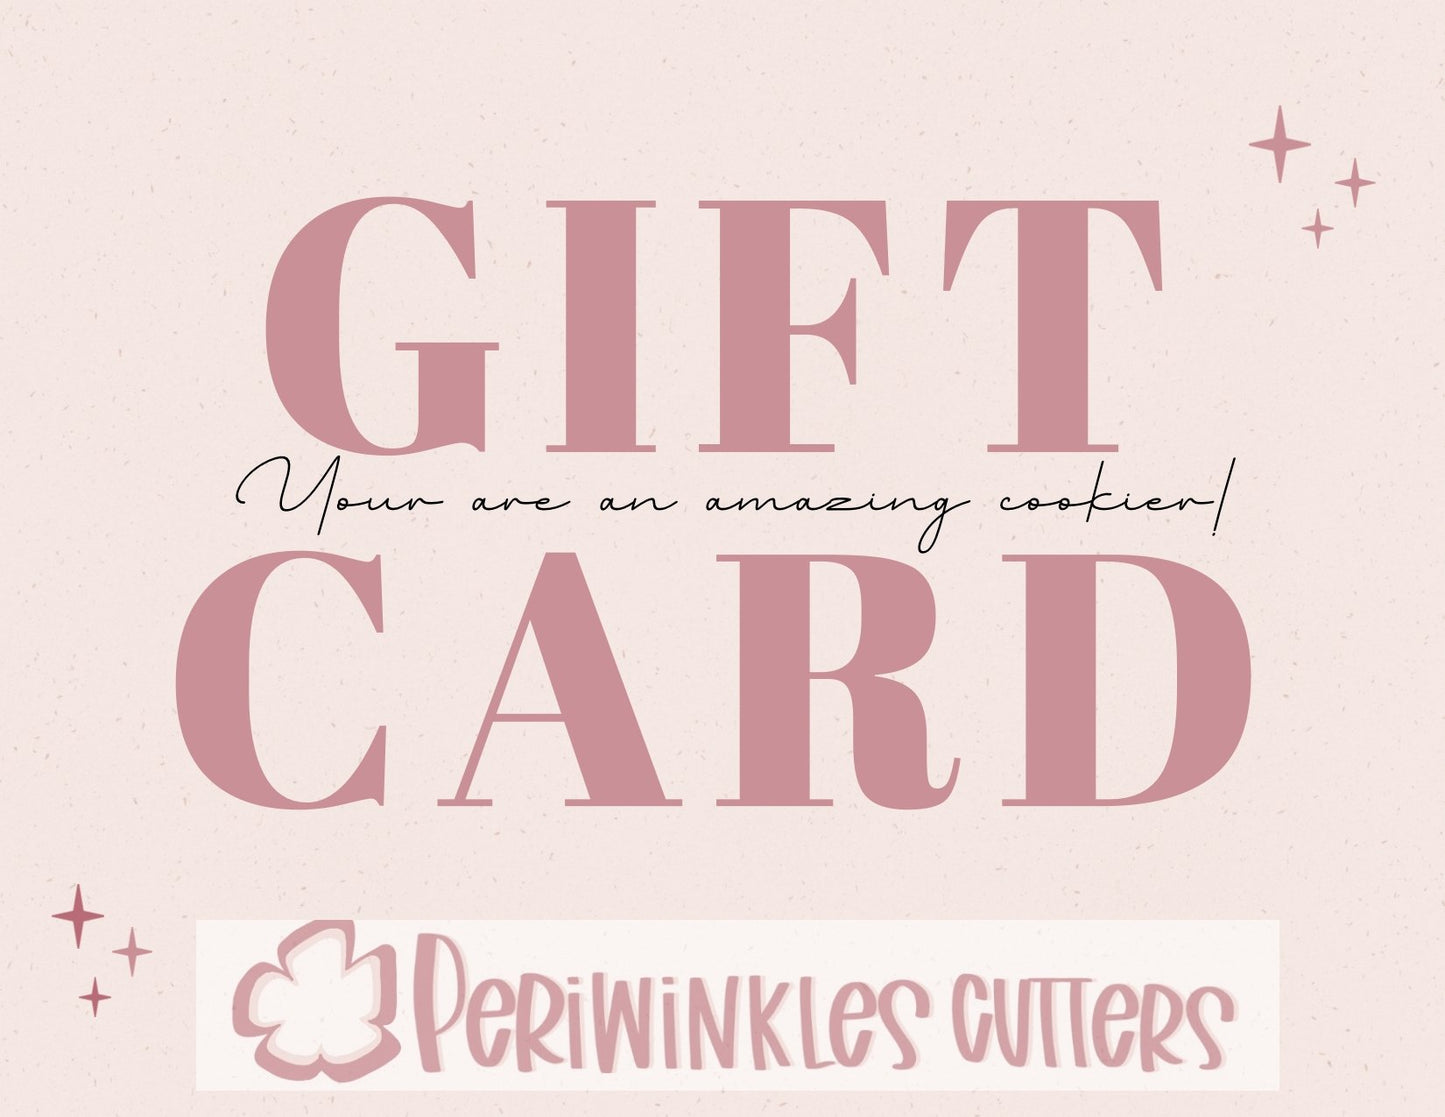 Periwinkles Cutters Gift Card - Periwinkles Cutters Gift Card